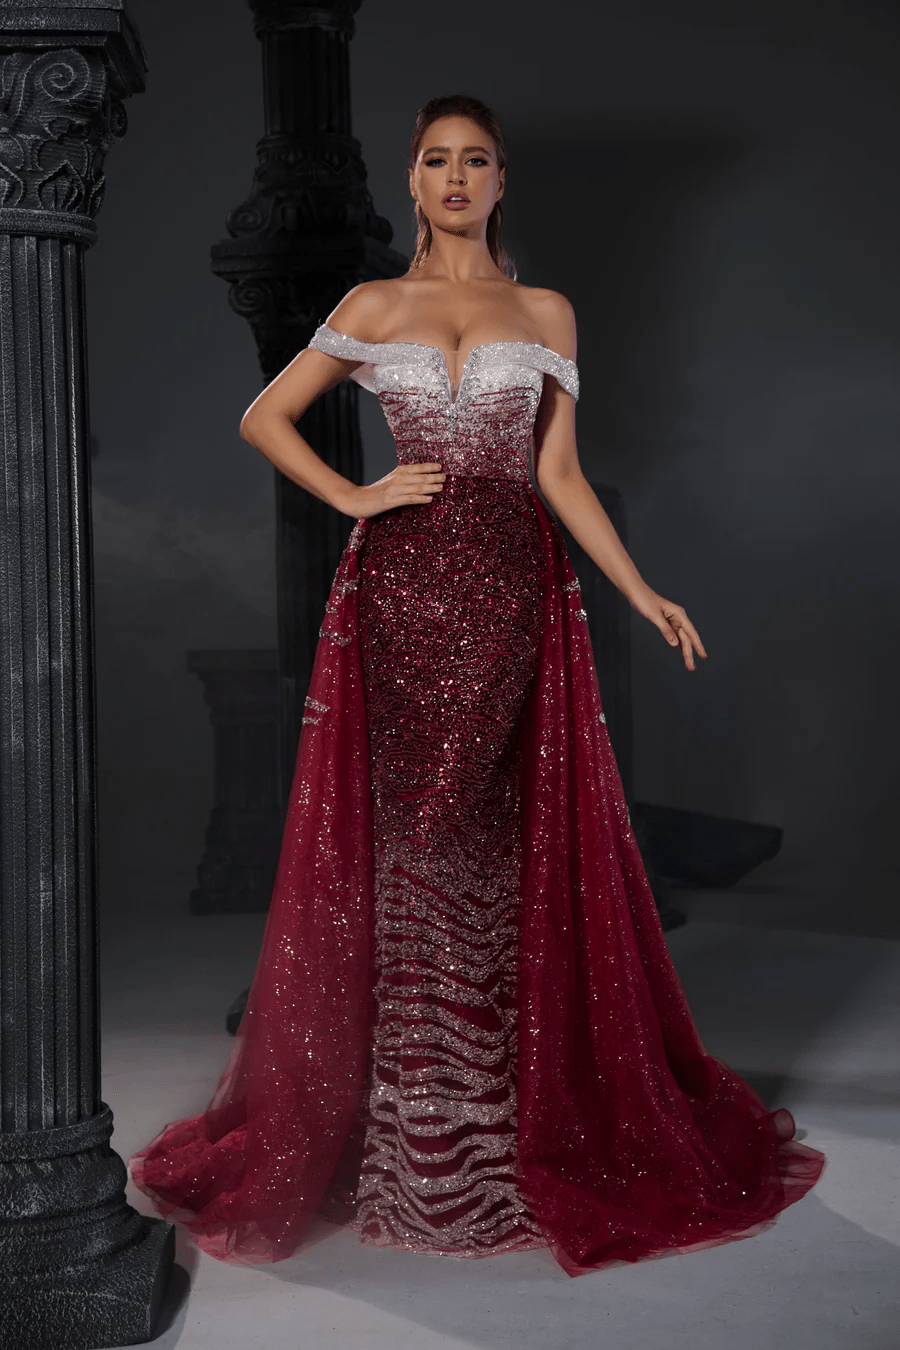 Gothic Red Sequin Evening Gown with Off-Shoulder Design - Designer Sequin Gown and Glitter Dress with Tulle Plus Size - WonderlandByLilian